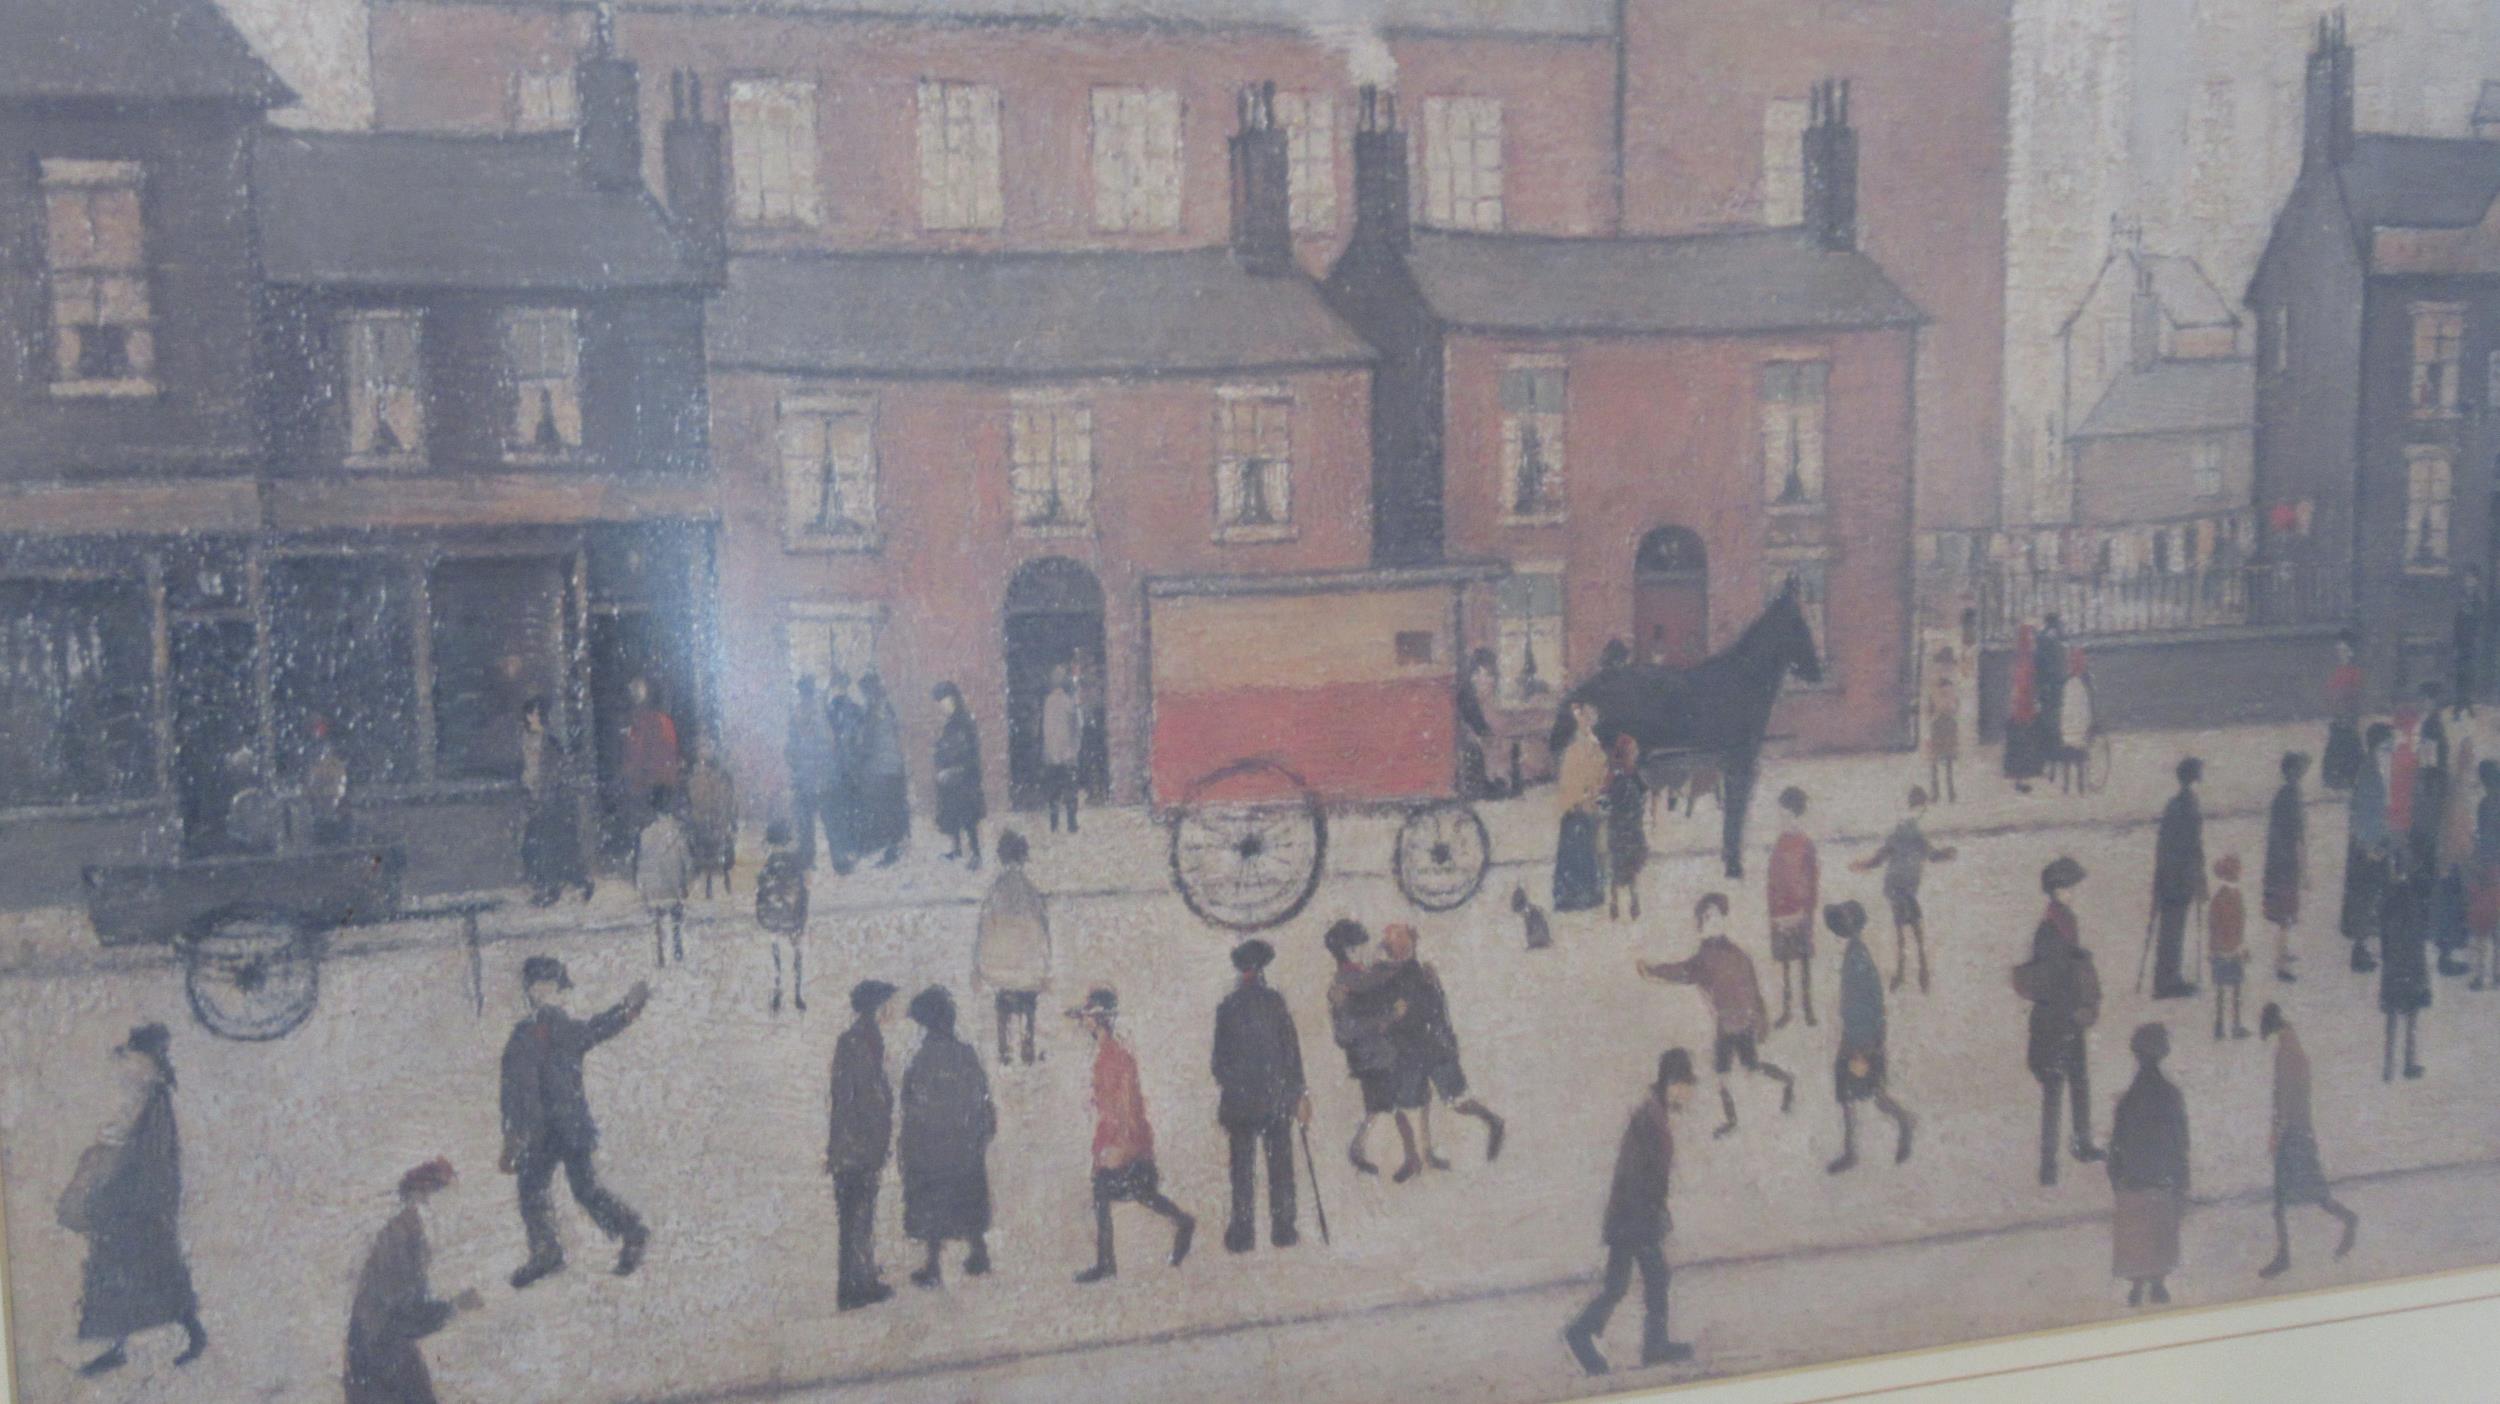 A signed Lowry print signed LS Lowry 1928, 85cm wide x 70cm high - Image 3 of 3